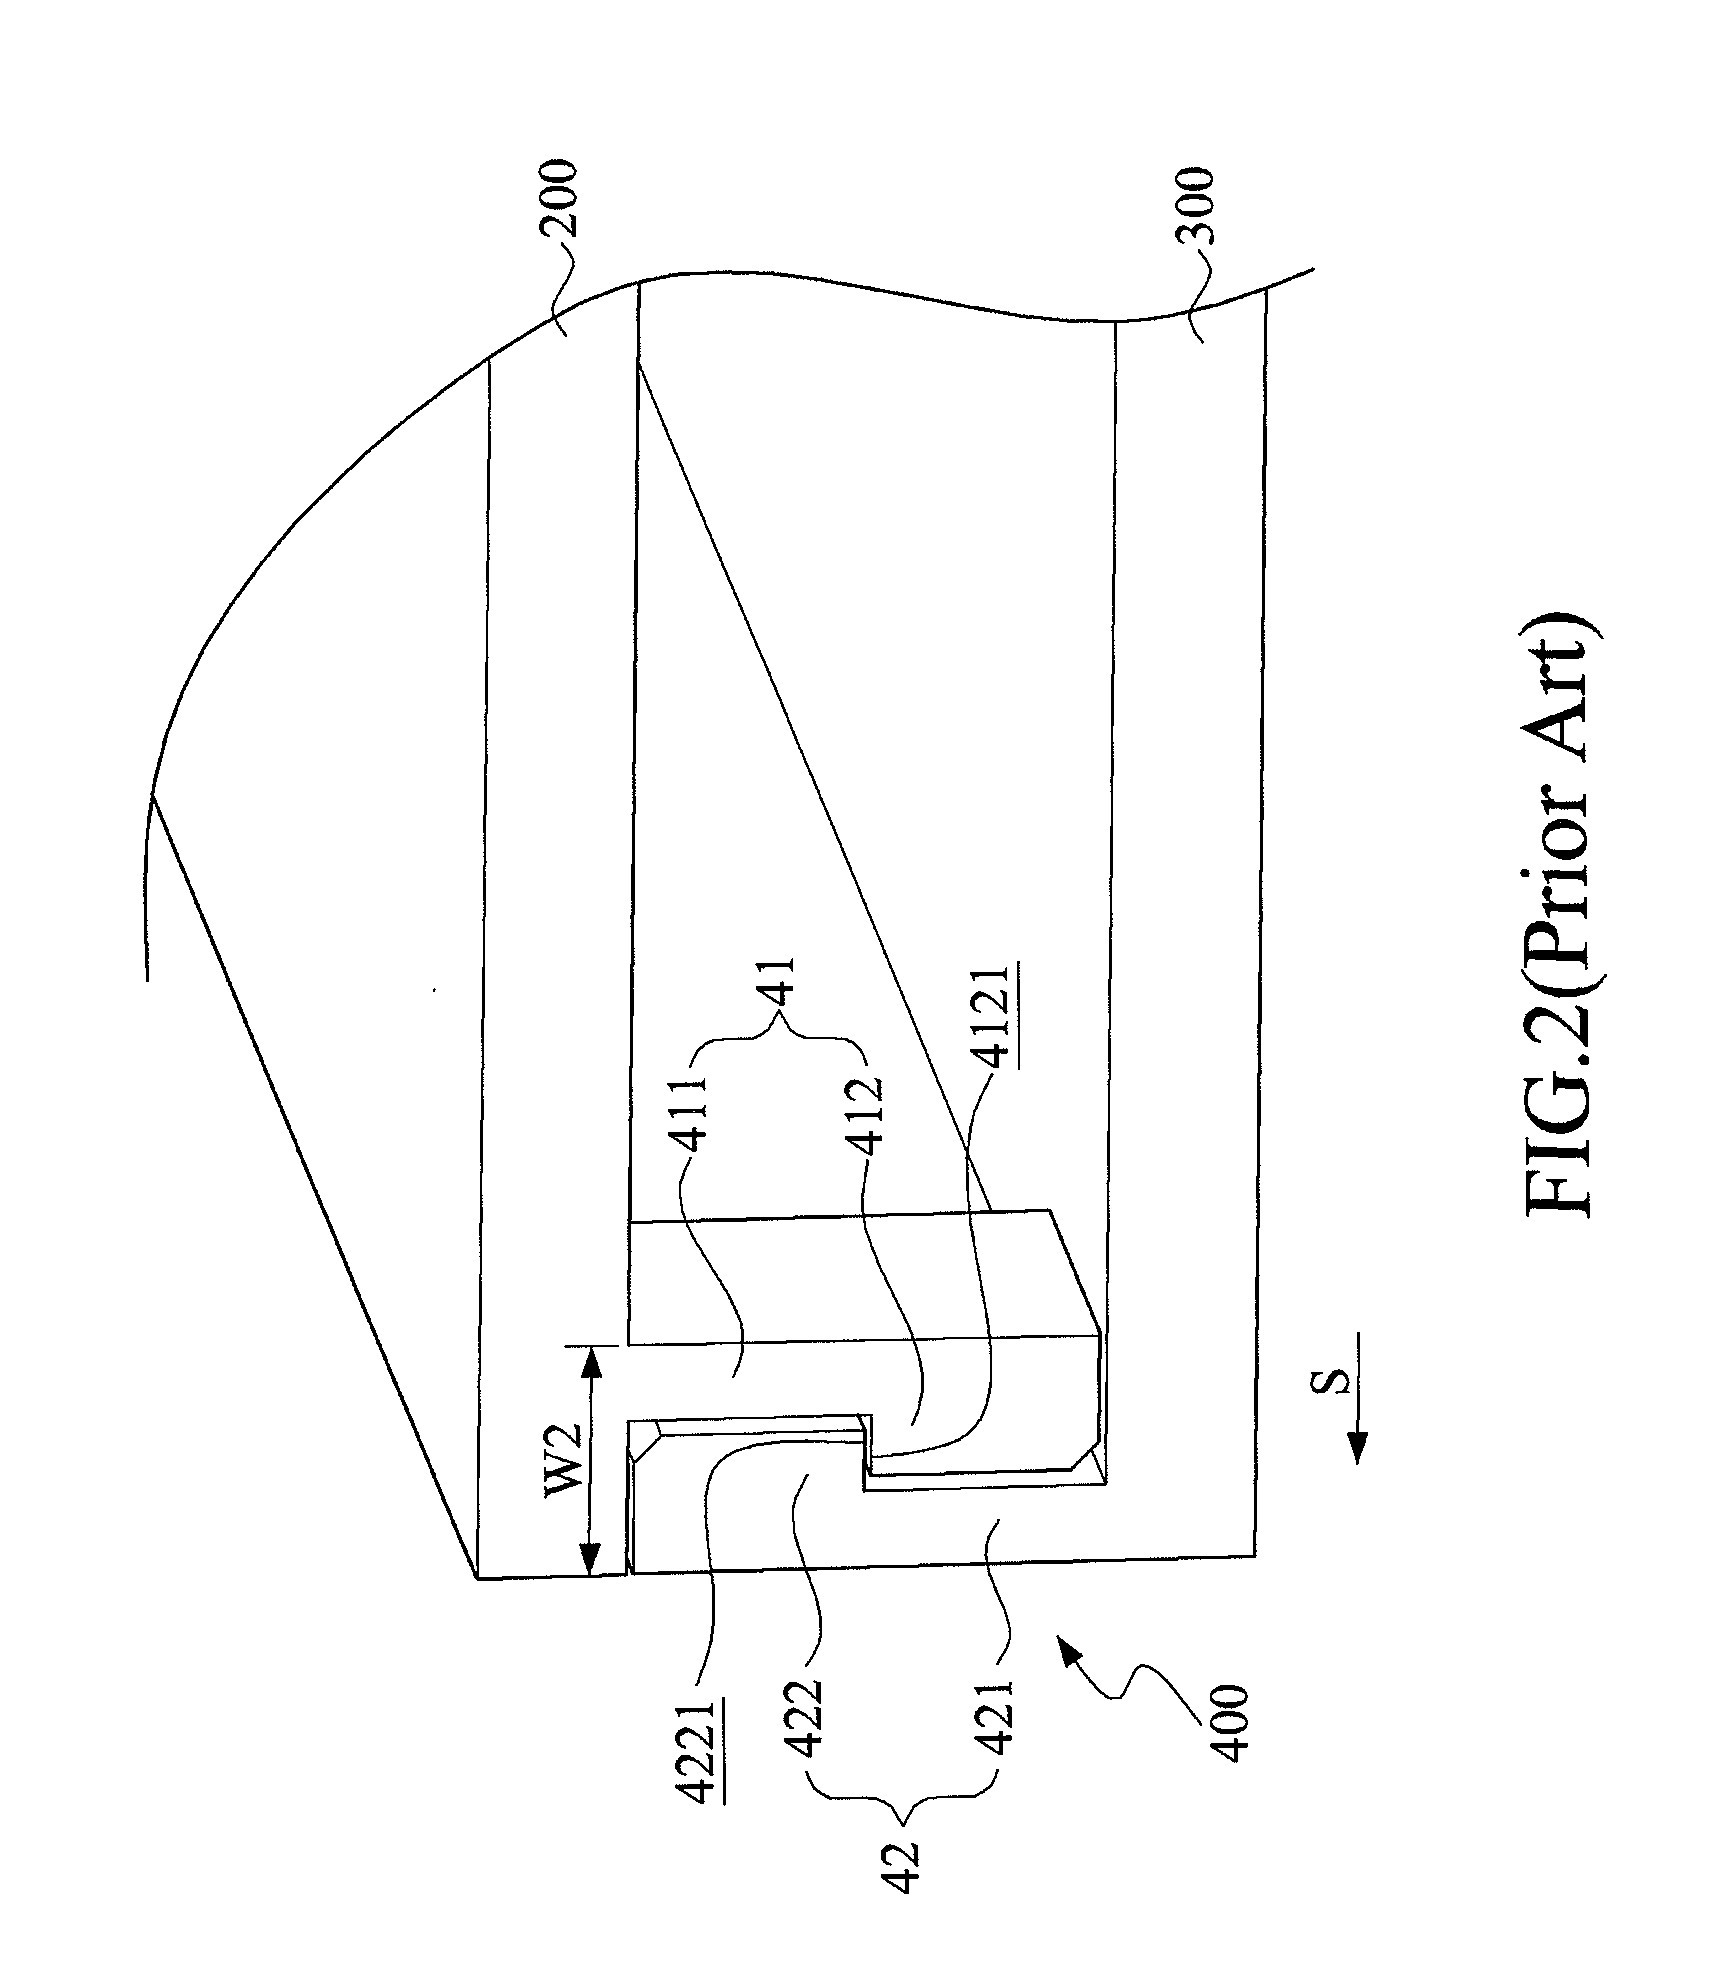 Coupling structure for a shell